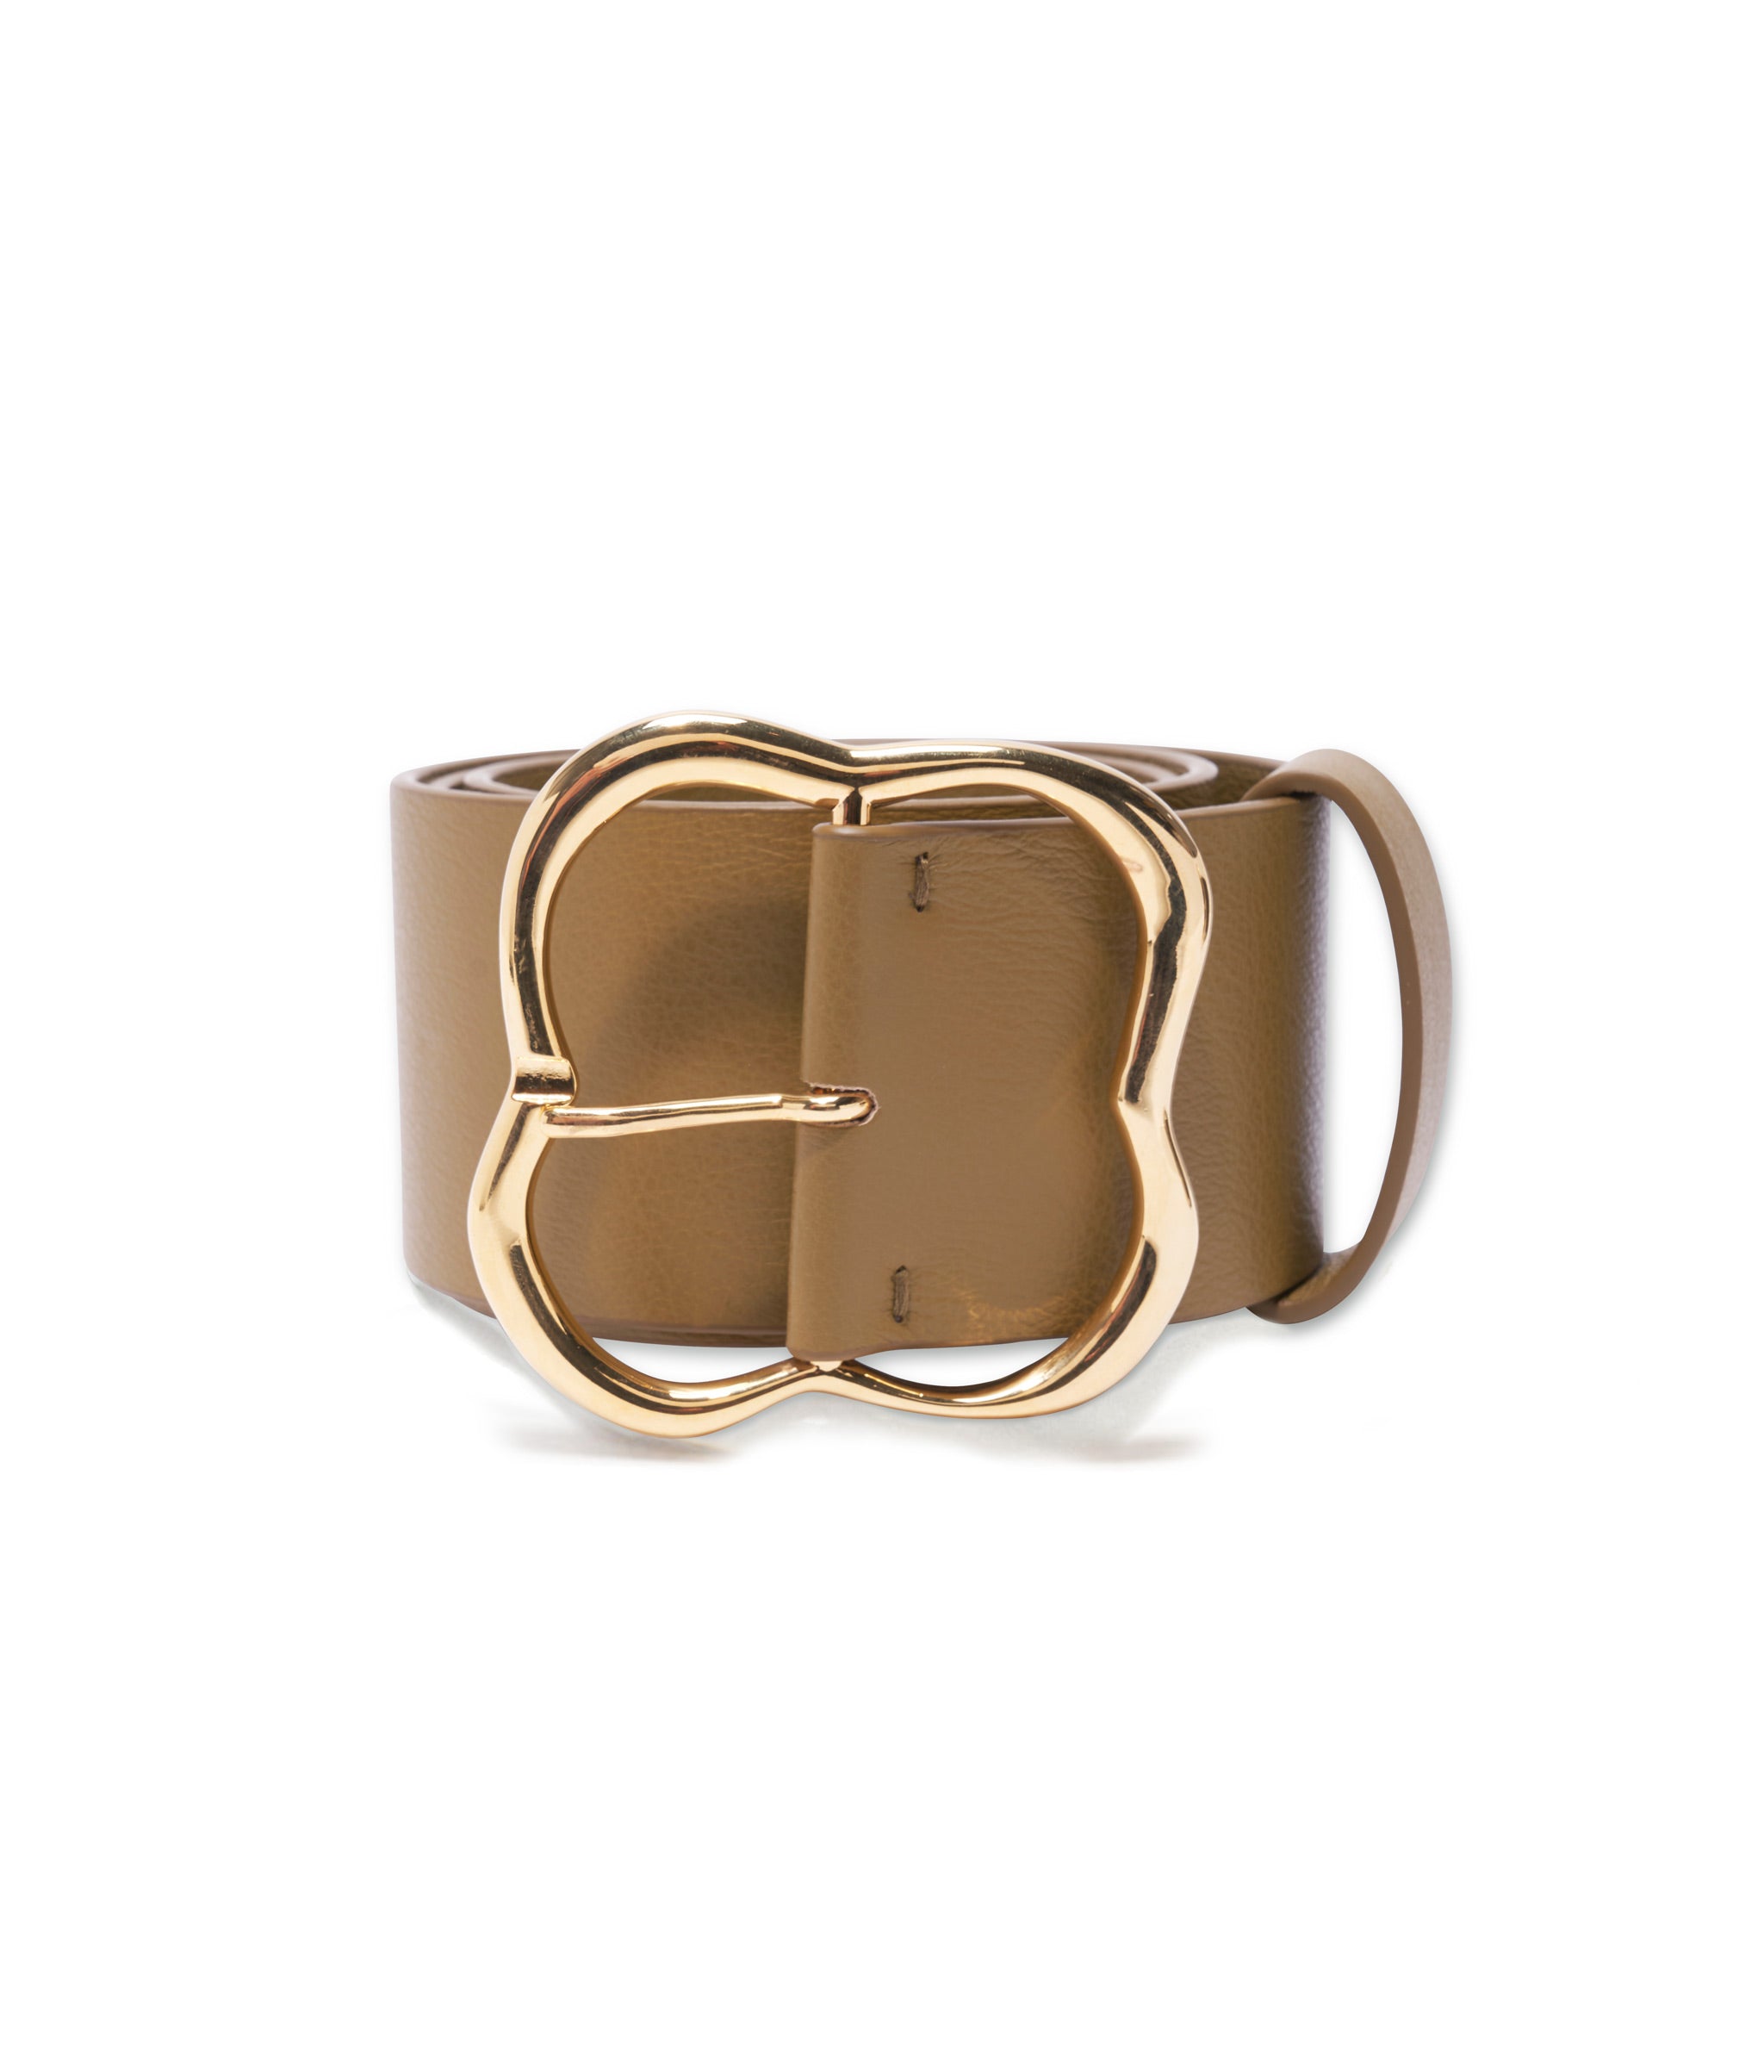 Florence Belt in Khaki. In khaki brown leather with abstract clover-shaped buckle in gold-plated brass.